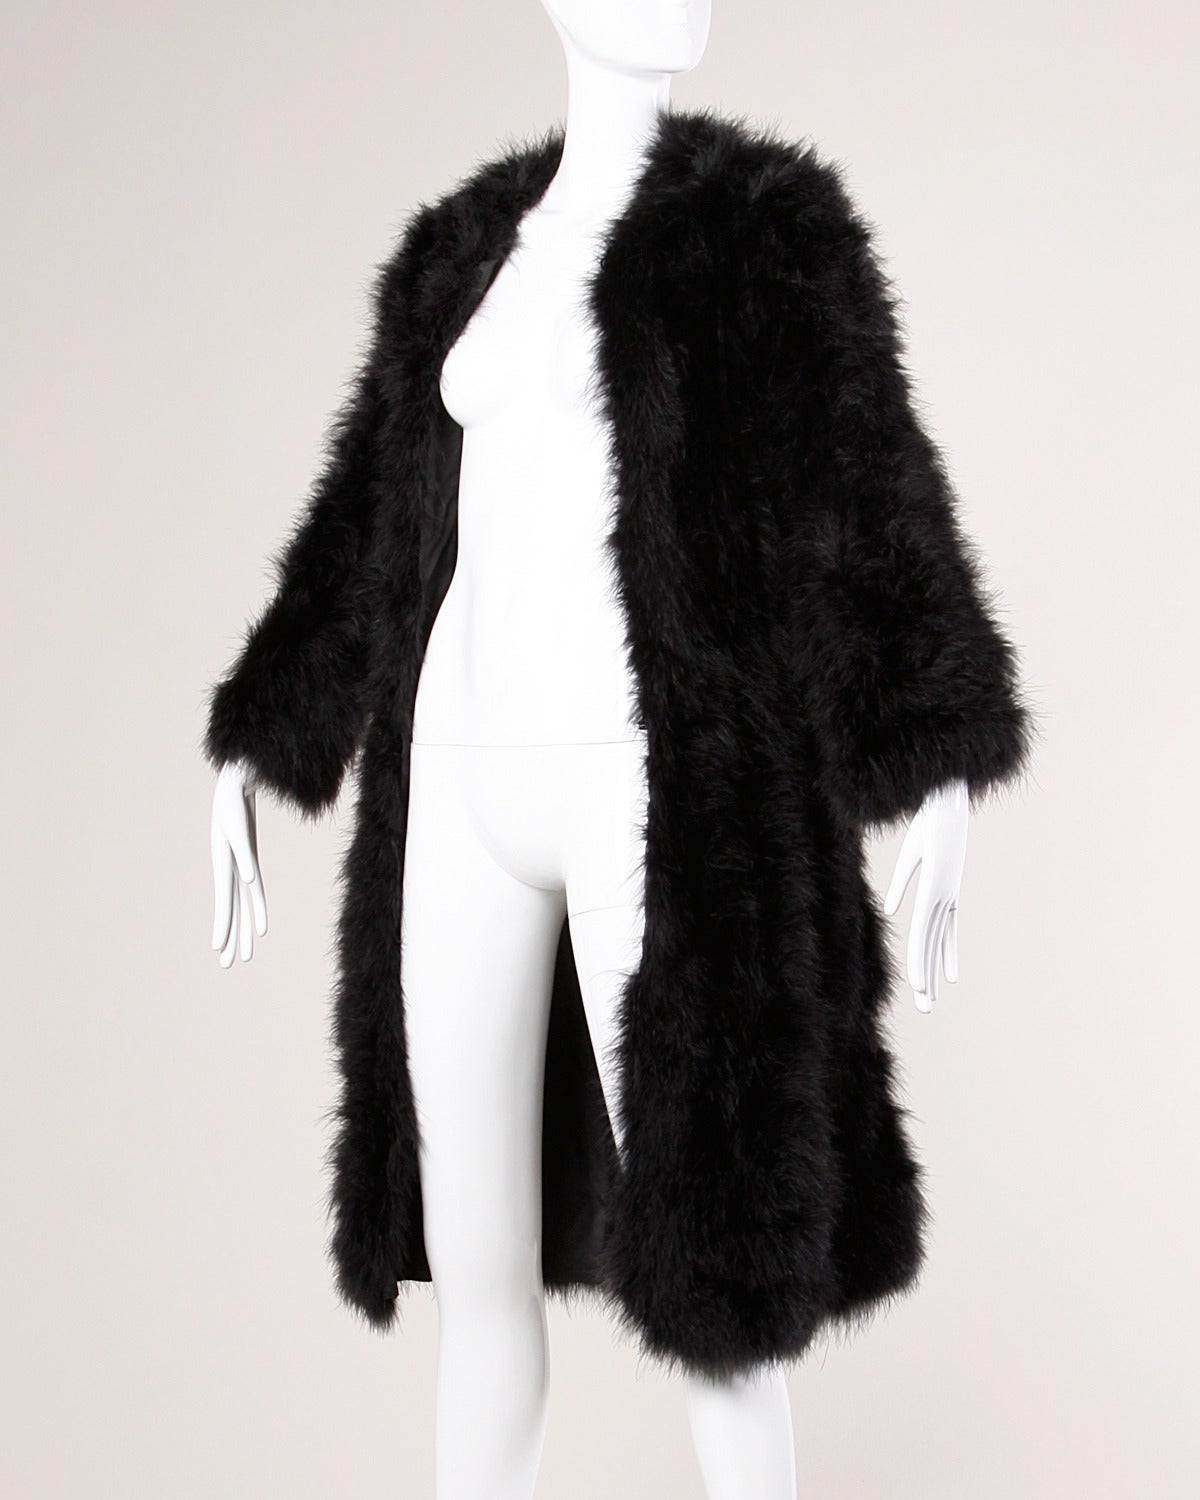 Details:

Fully Lined
Side Pockets
Front Hook Closure
Marked Size: M
Estimated Size: S-M
Color: Black
Fabric: Marabou Feathers/ Acetate Lining
Label: Not Marked

Measurements:

Bust: Up To 42